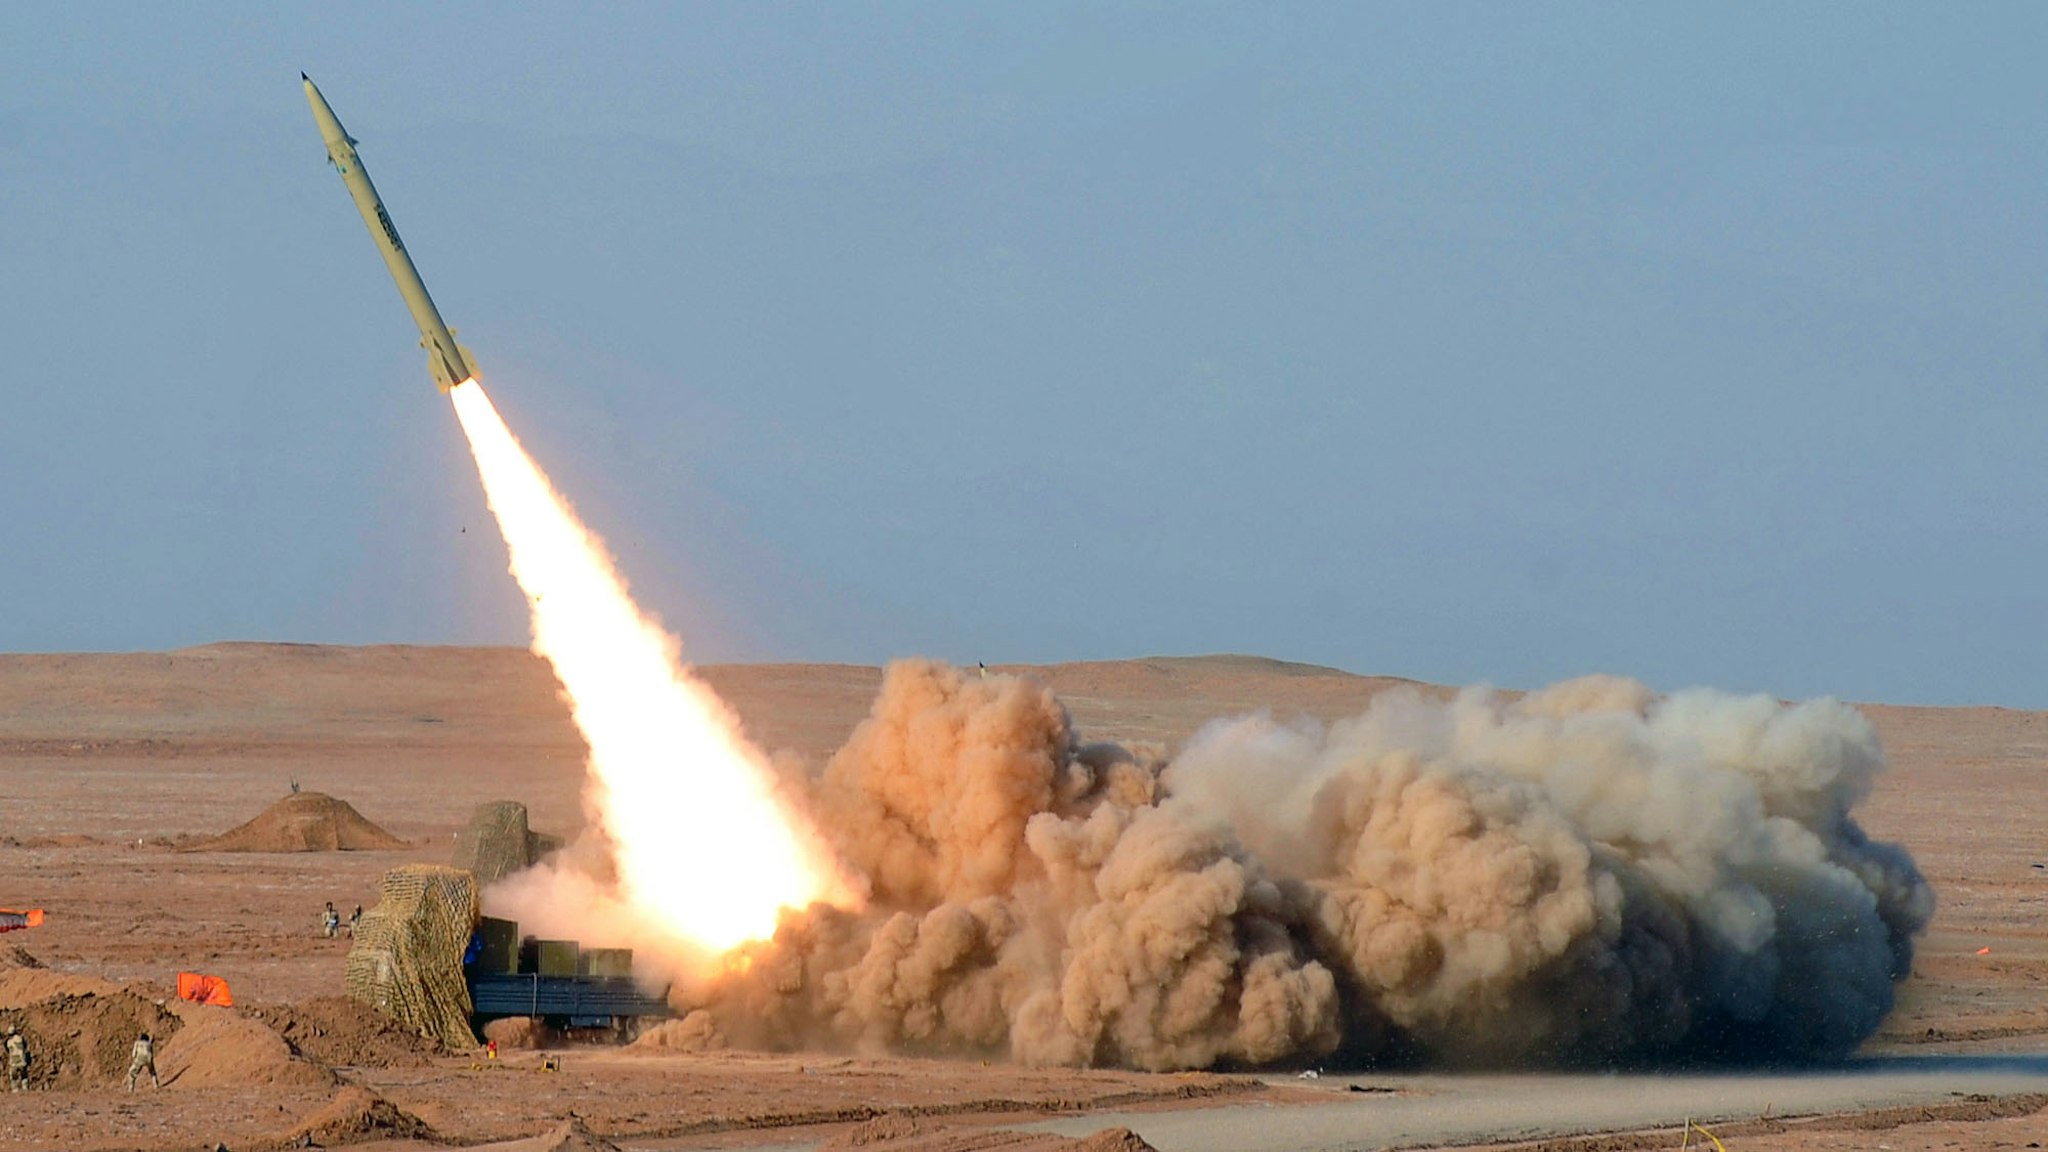 TOPSHOT - In a picture obtained from Iran's ISNA news agency on July 3, 2012, shows AN Iranian short-range missile (Fateh) launched during the second day of military exercises, codenamed Great Prophet-7, for Iran's elite Revolutionary Guards at an undisclosed location in Iran's Kavir Desert.